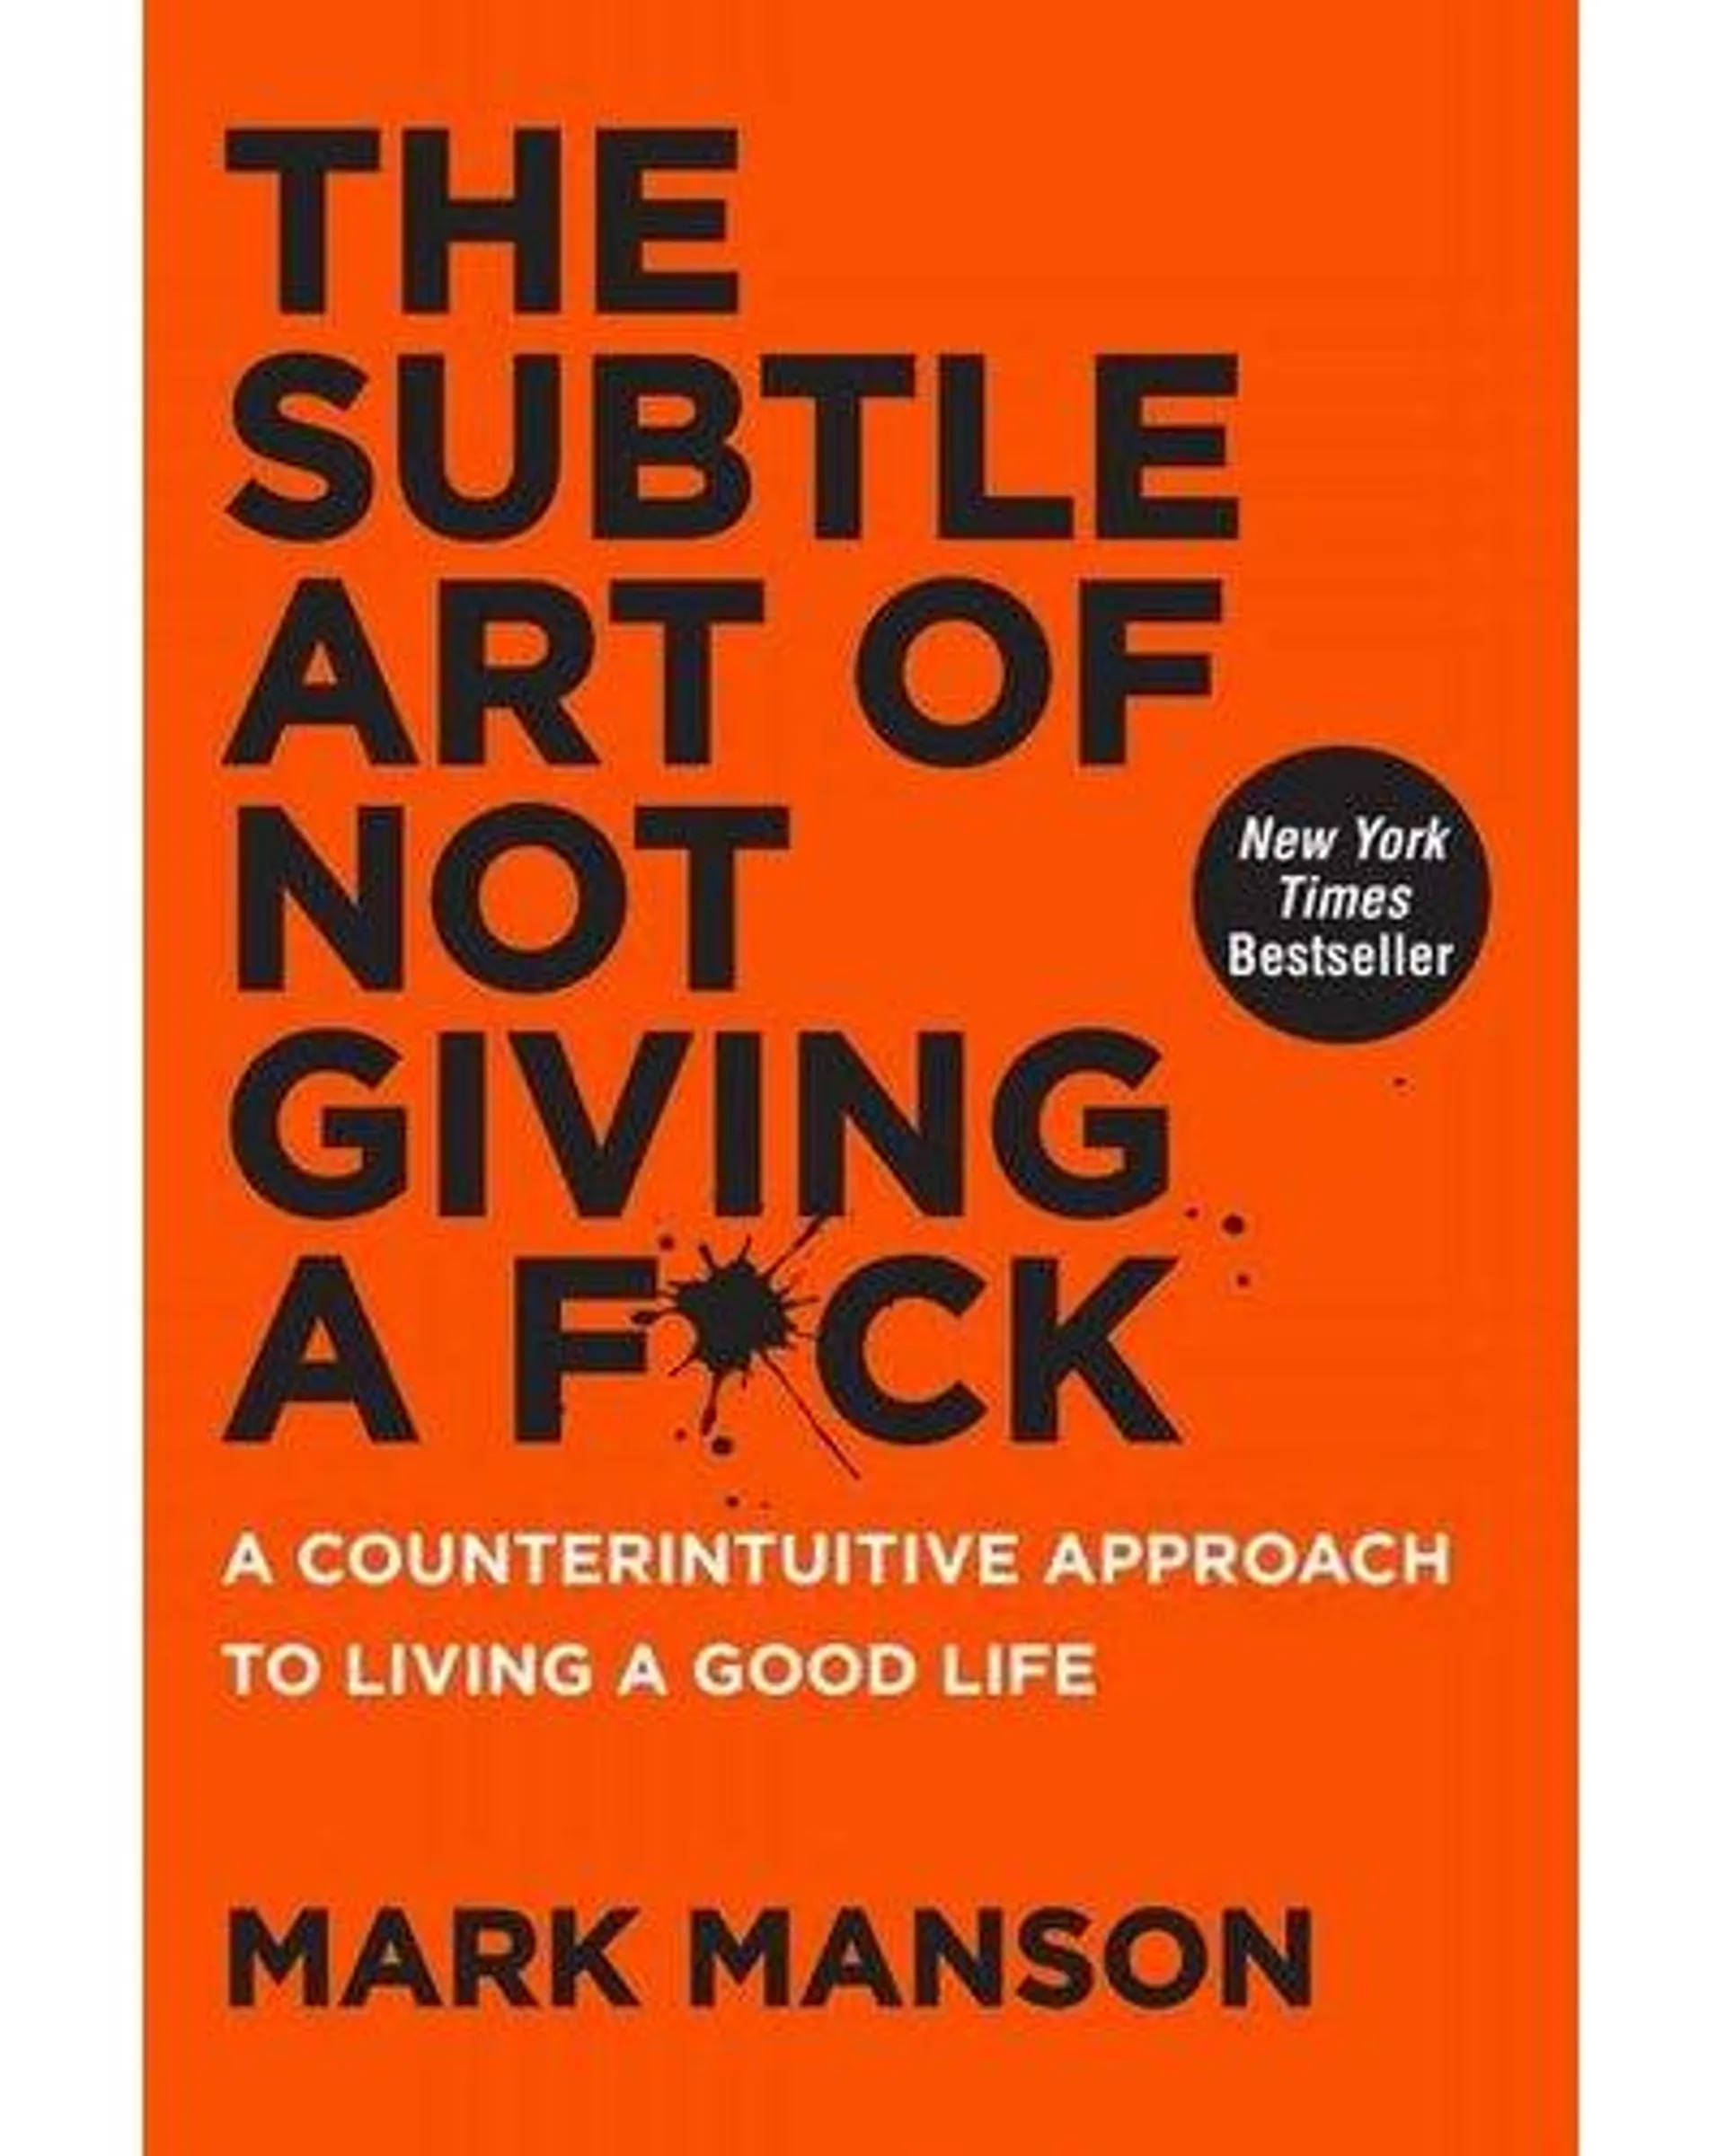 The Subtle Art Of Not Giving A F*ck - A Counterintuitive Approach To Living A Good Life (Paperback)